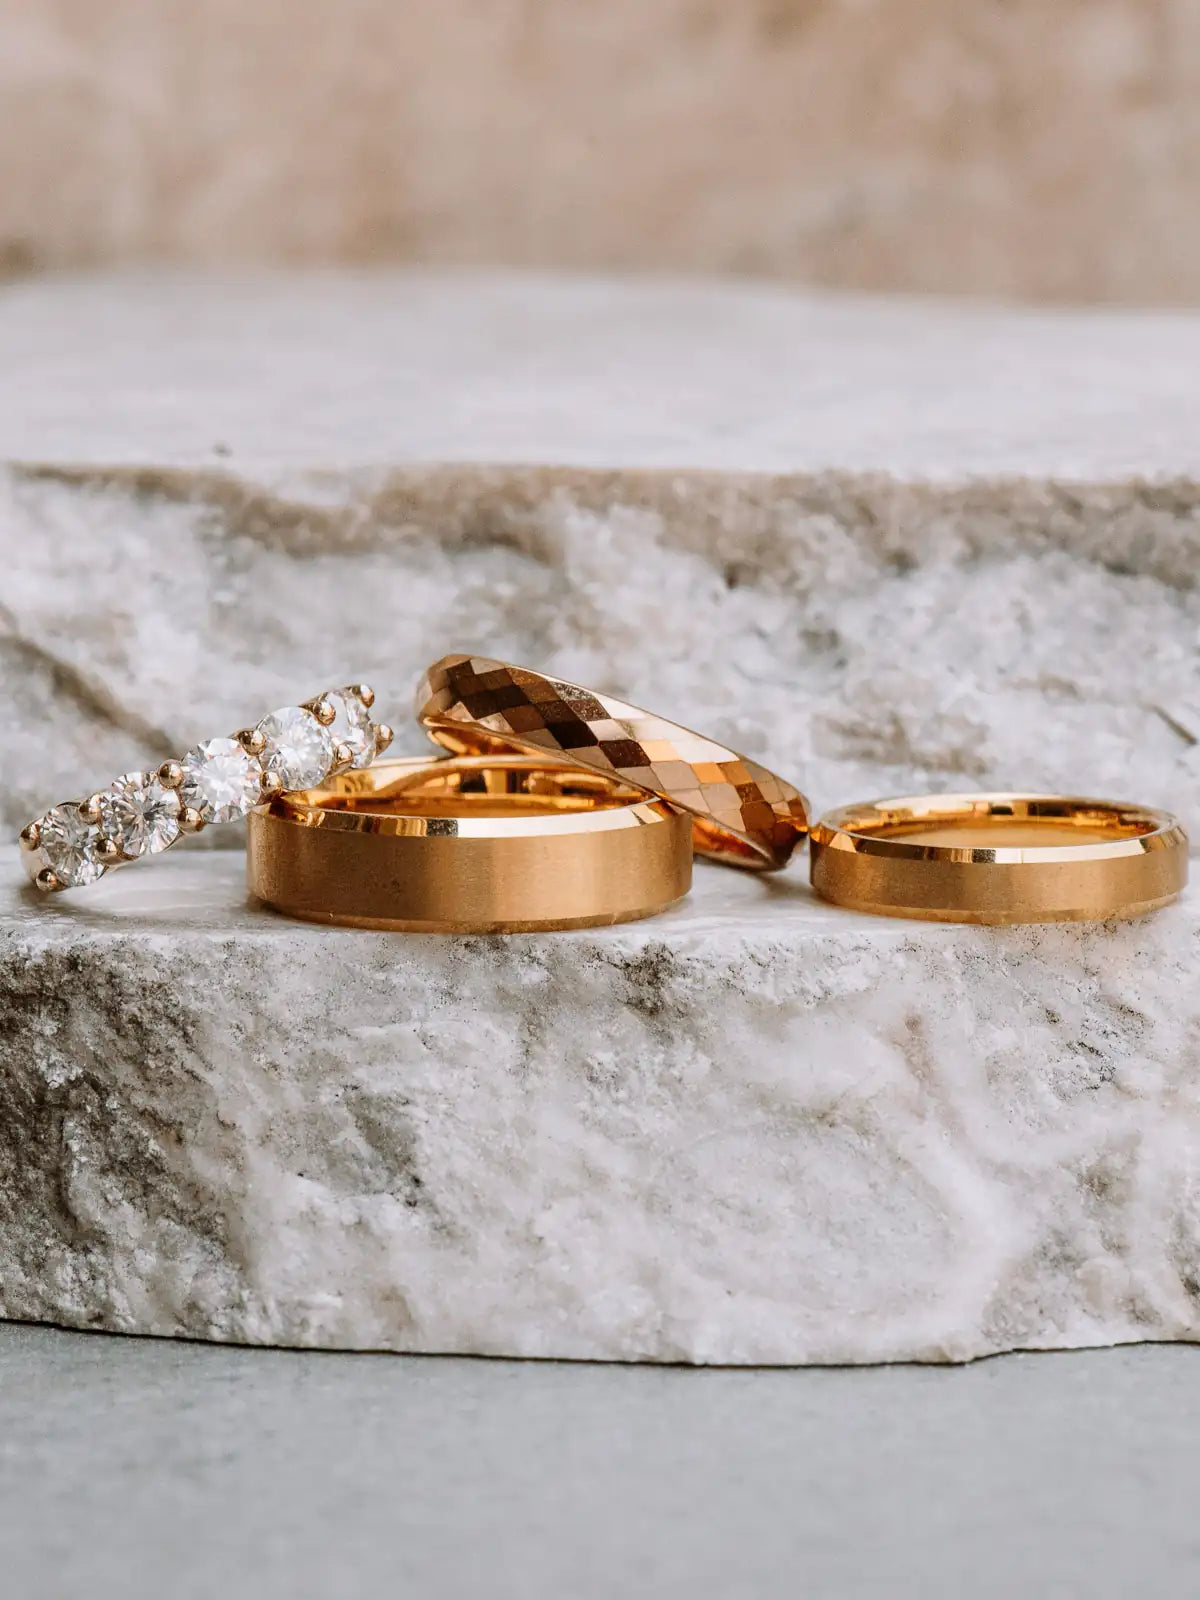 Wedding Ring Appraisal 101: Everything You Need to Know